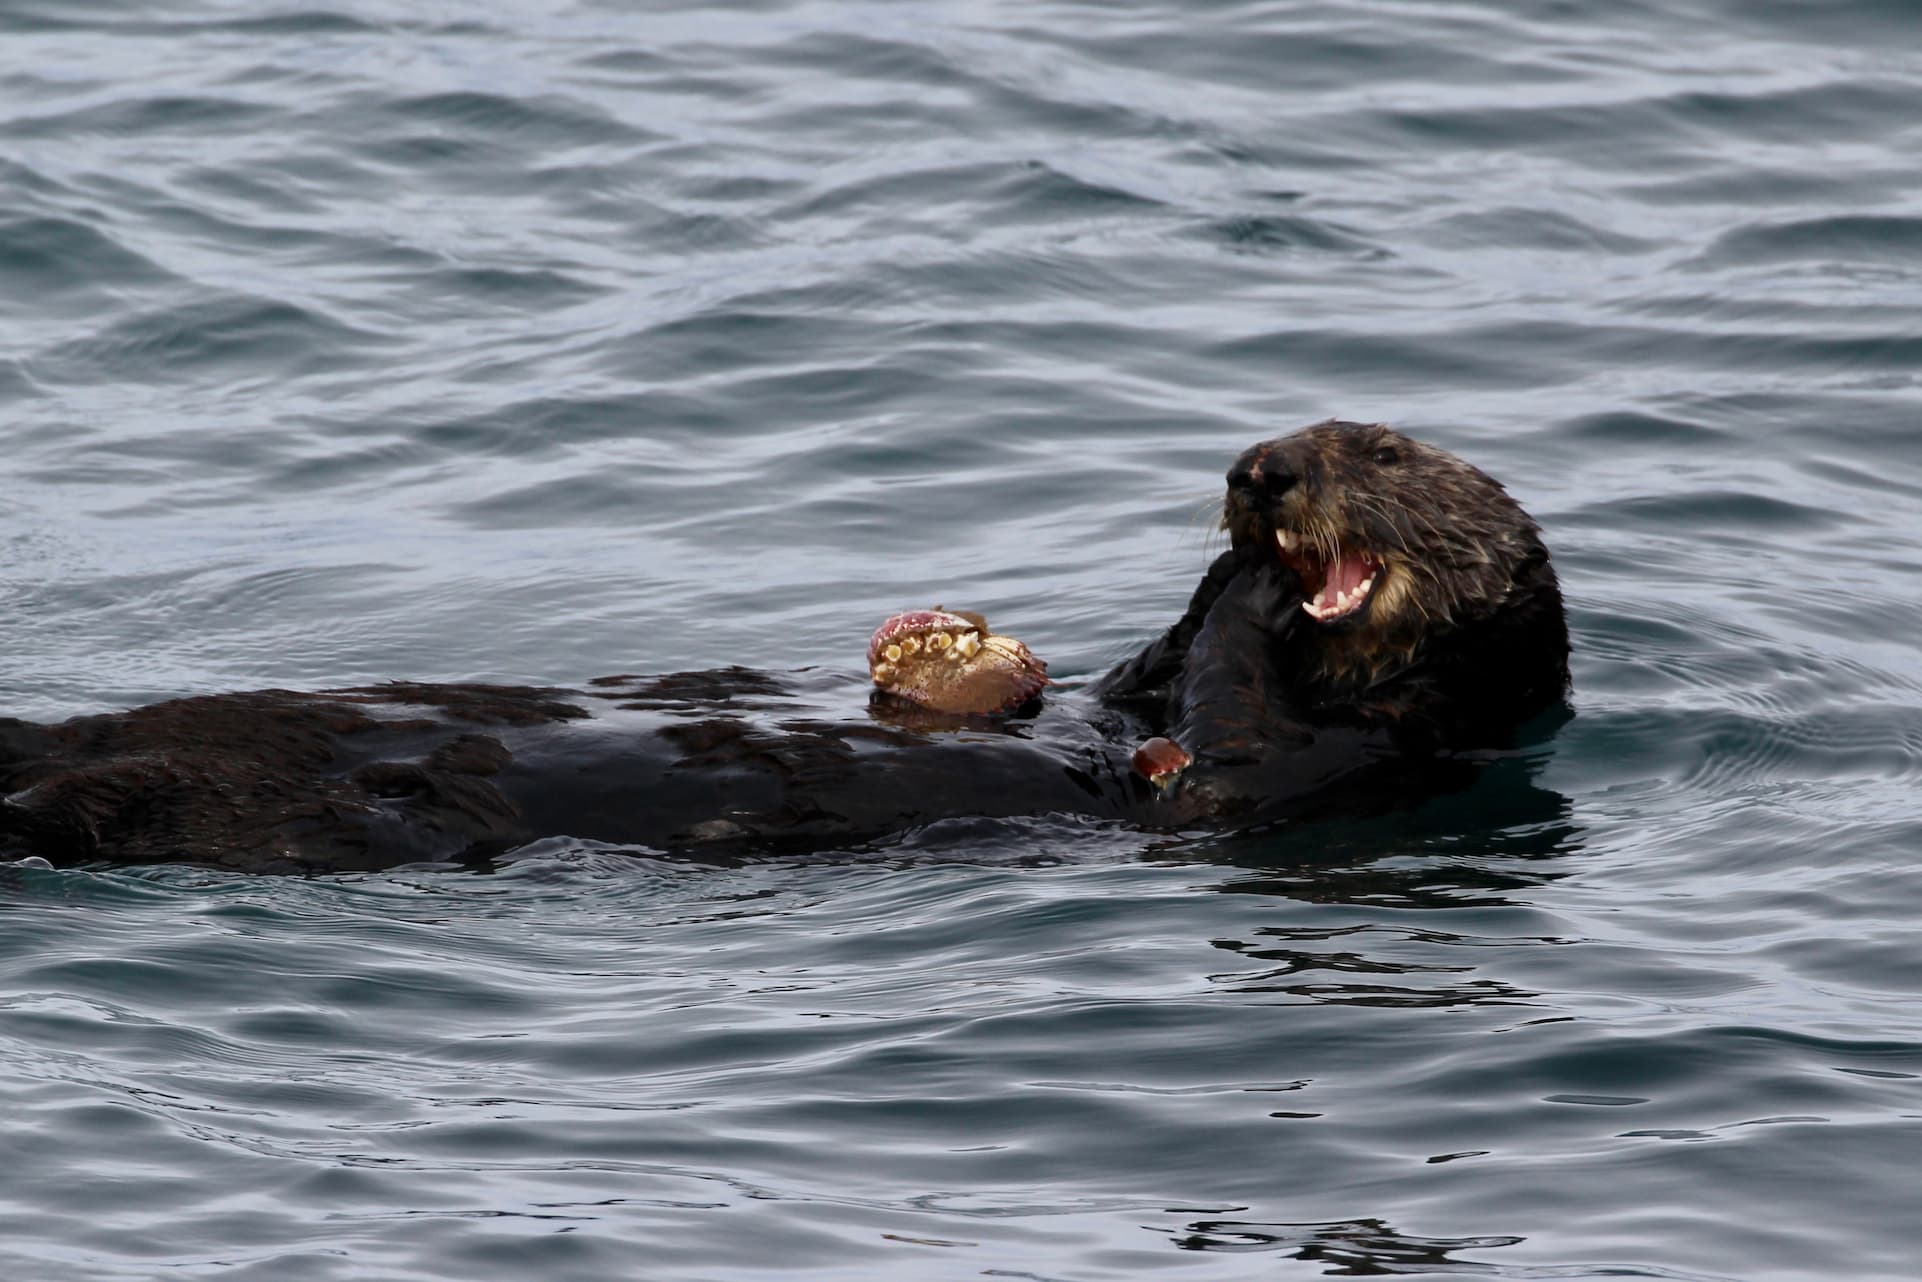 A sea otter floating on its back in the water eating a crab